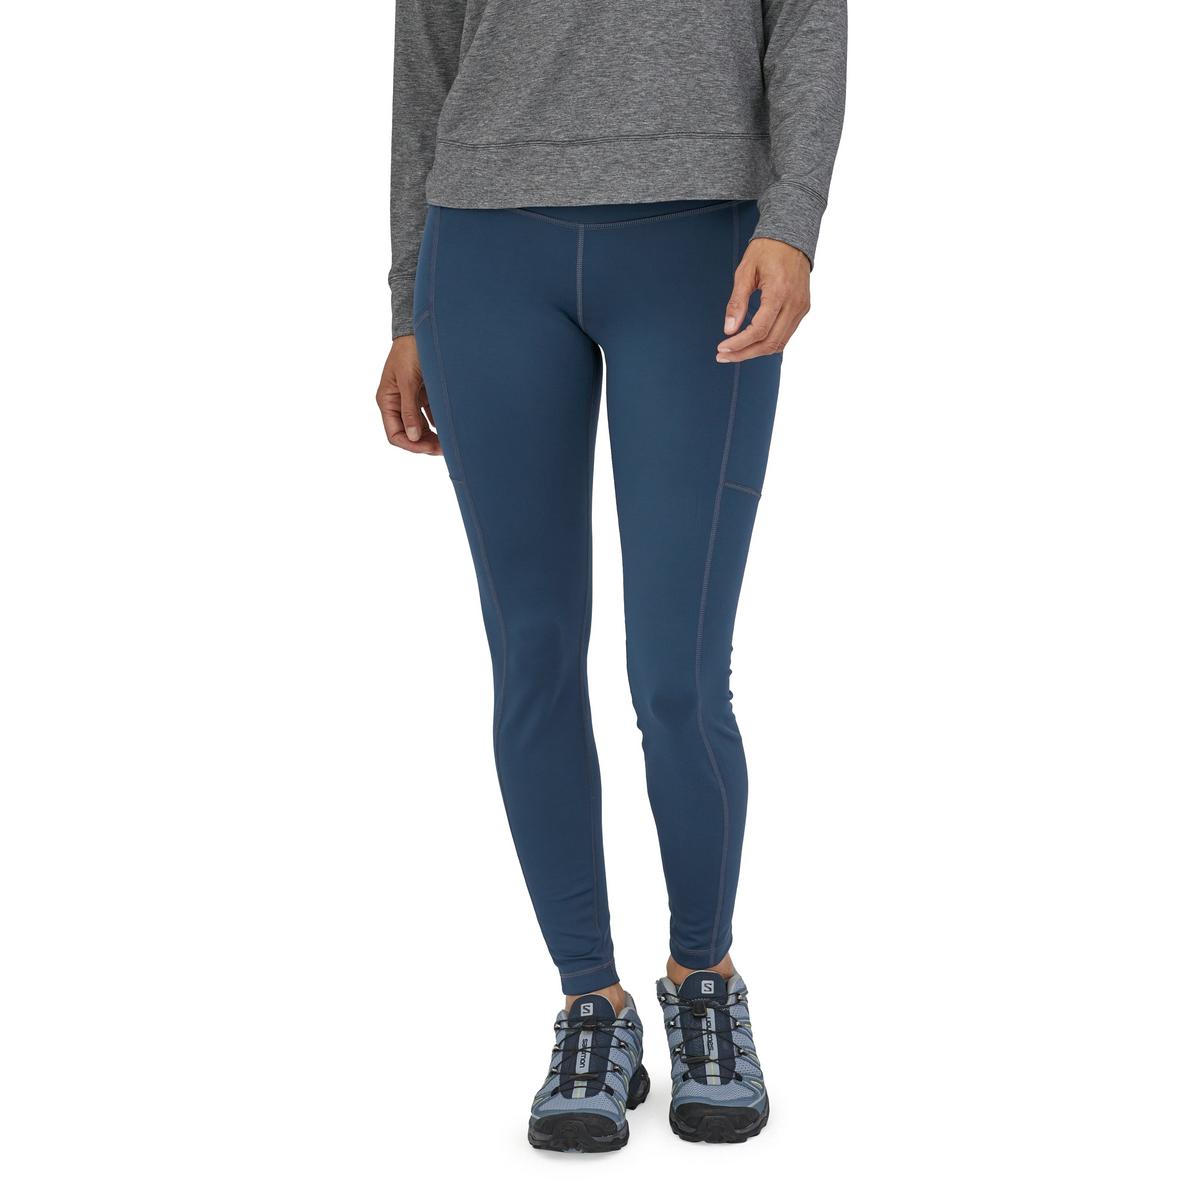 Patagonia Women's Pack Out Tights - Tidepool Blue